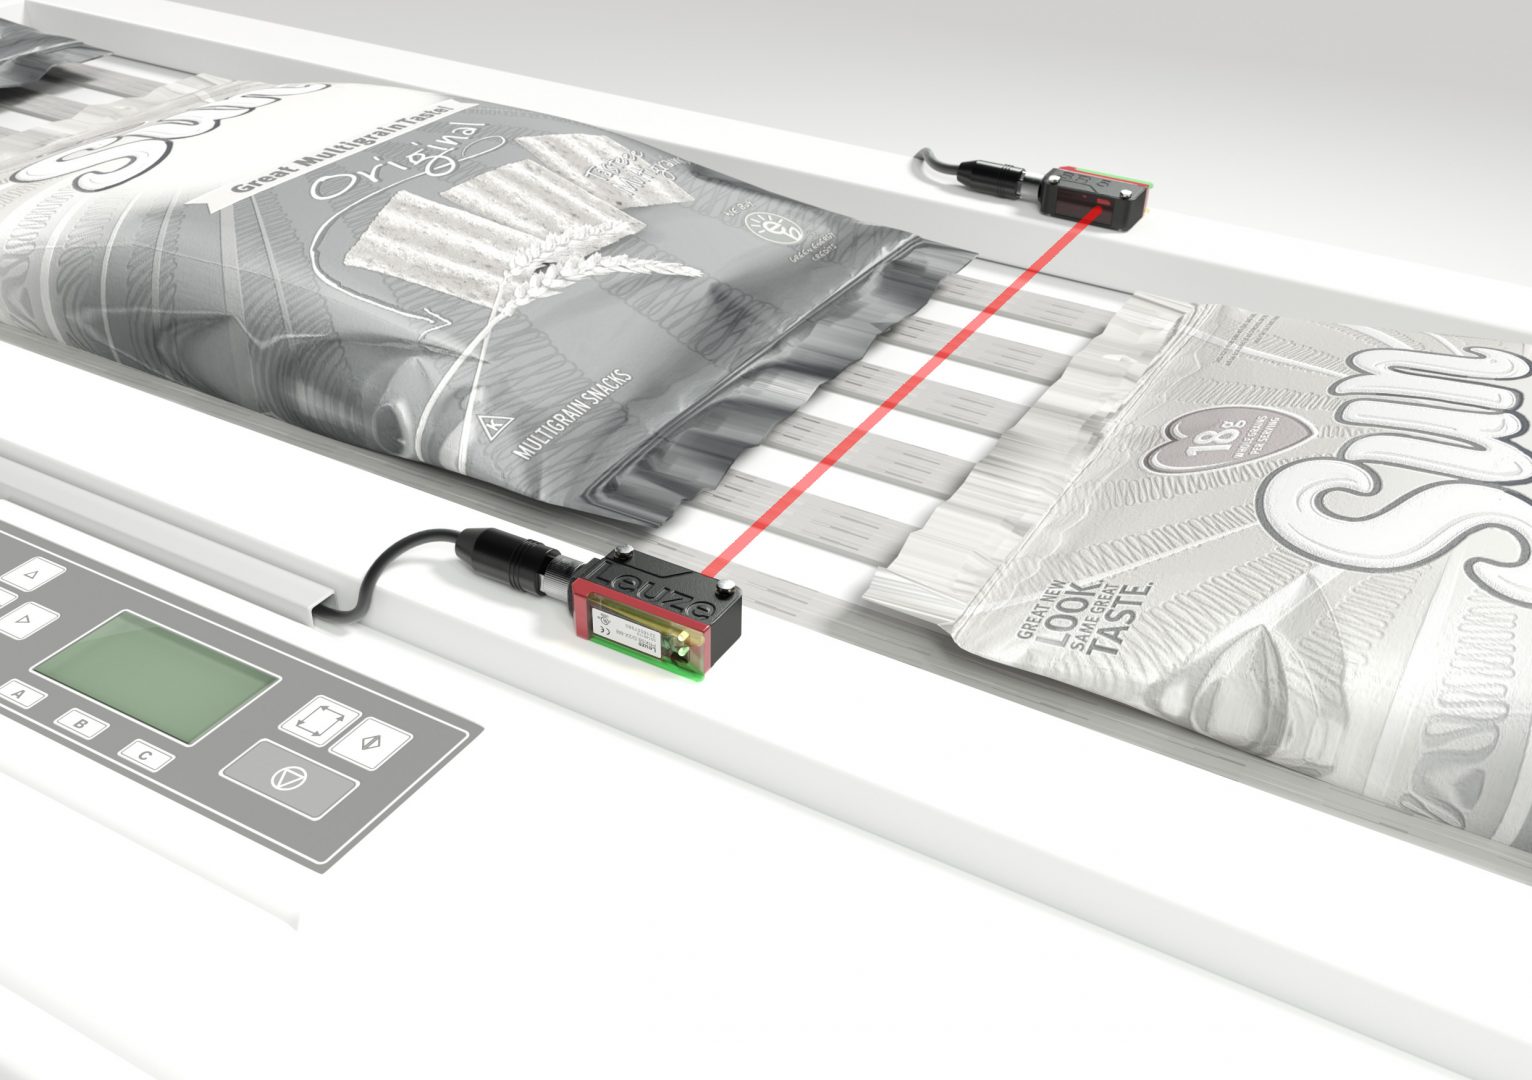 Leuze introduces the 5B sensor series, which is compact and flexible